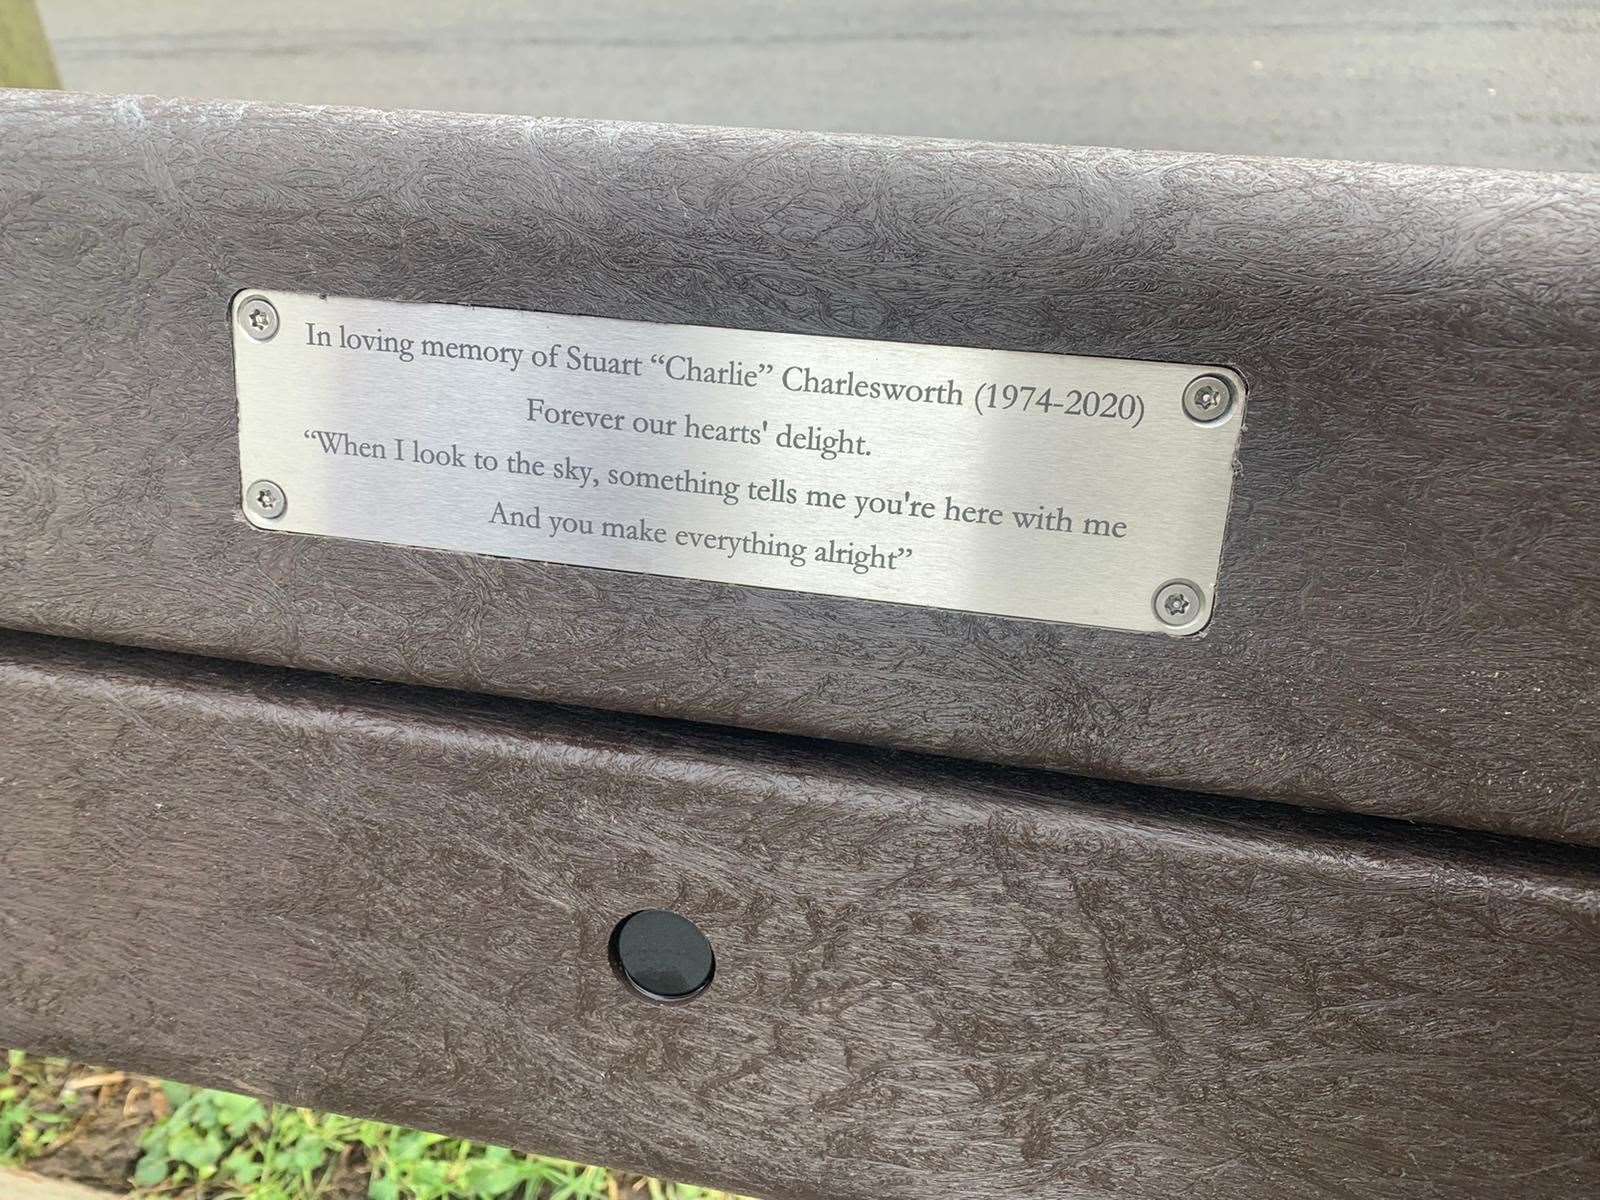 The Stuart Charlesworth memorial bench in Hearts Delight Road